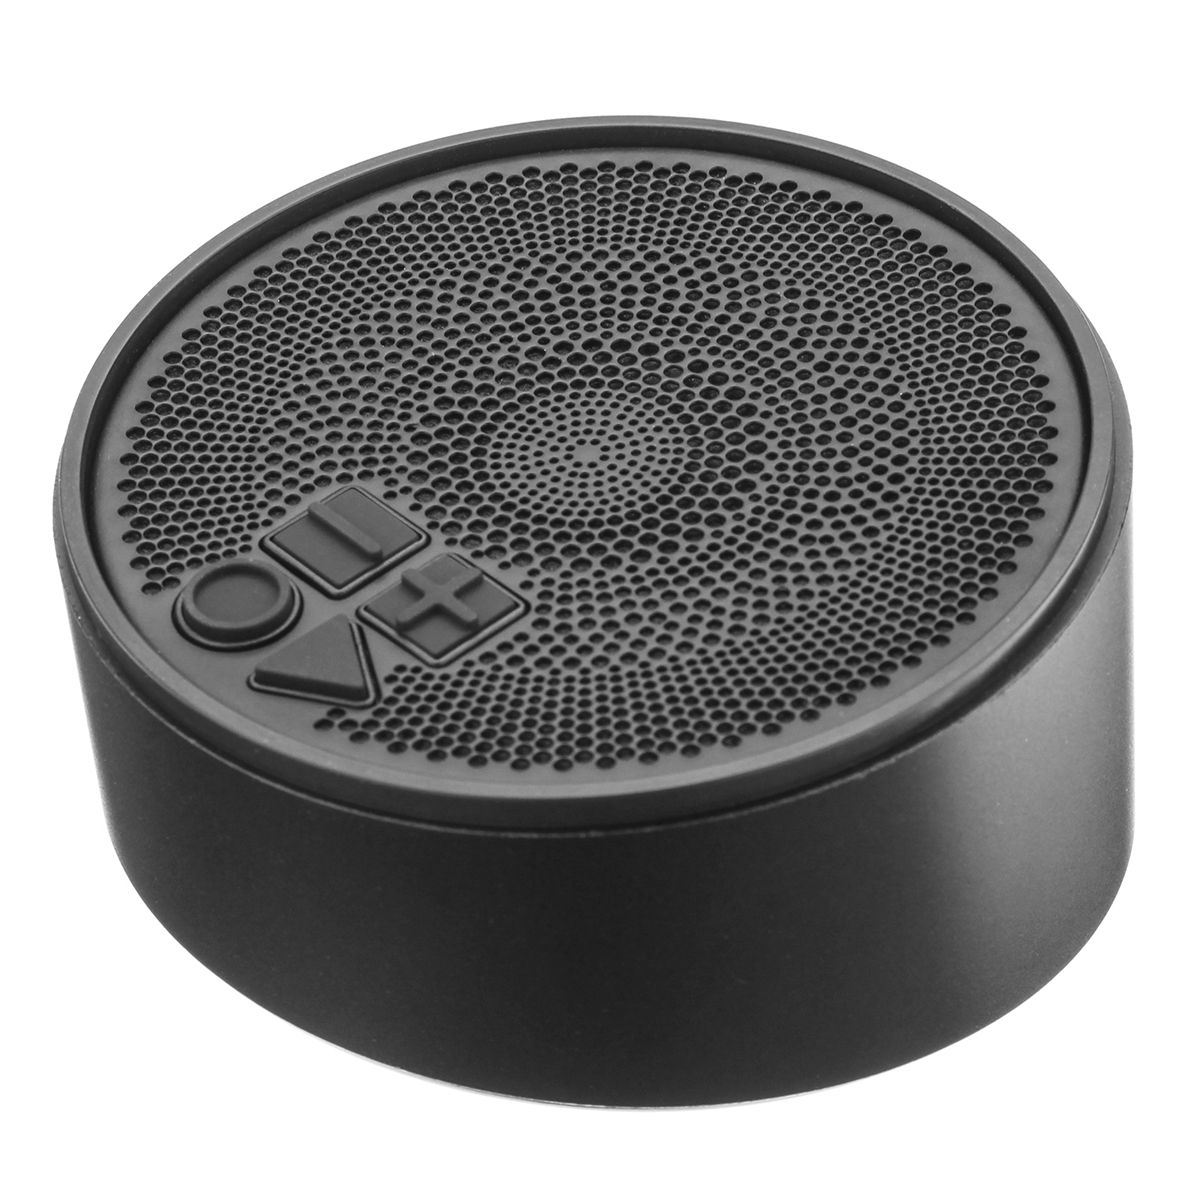 S7-TWS-Waterproof-bluetooth-42-Wireless-Speaker-with-Noice-Reduction-Microphone-Support-TF-Card-AUX-1268788